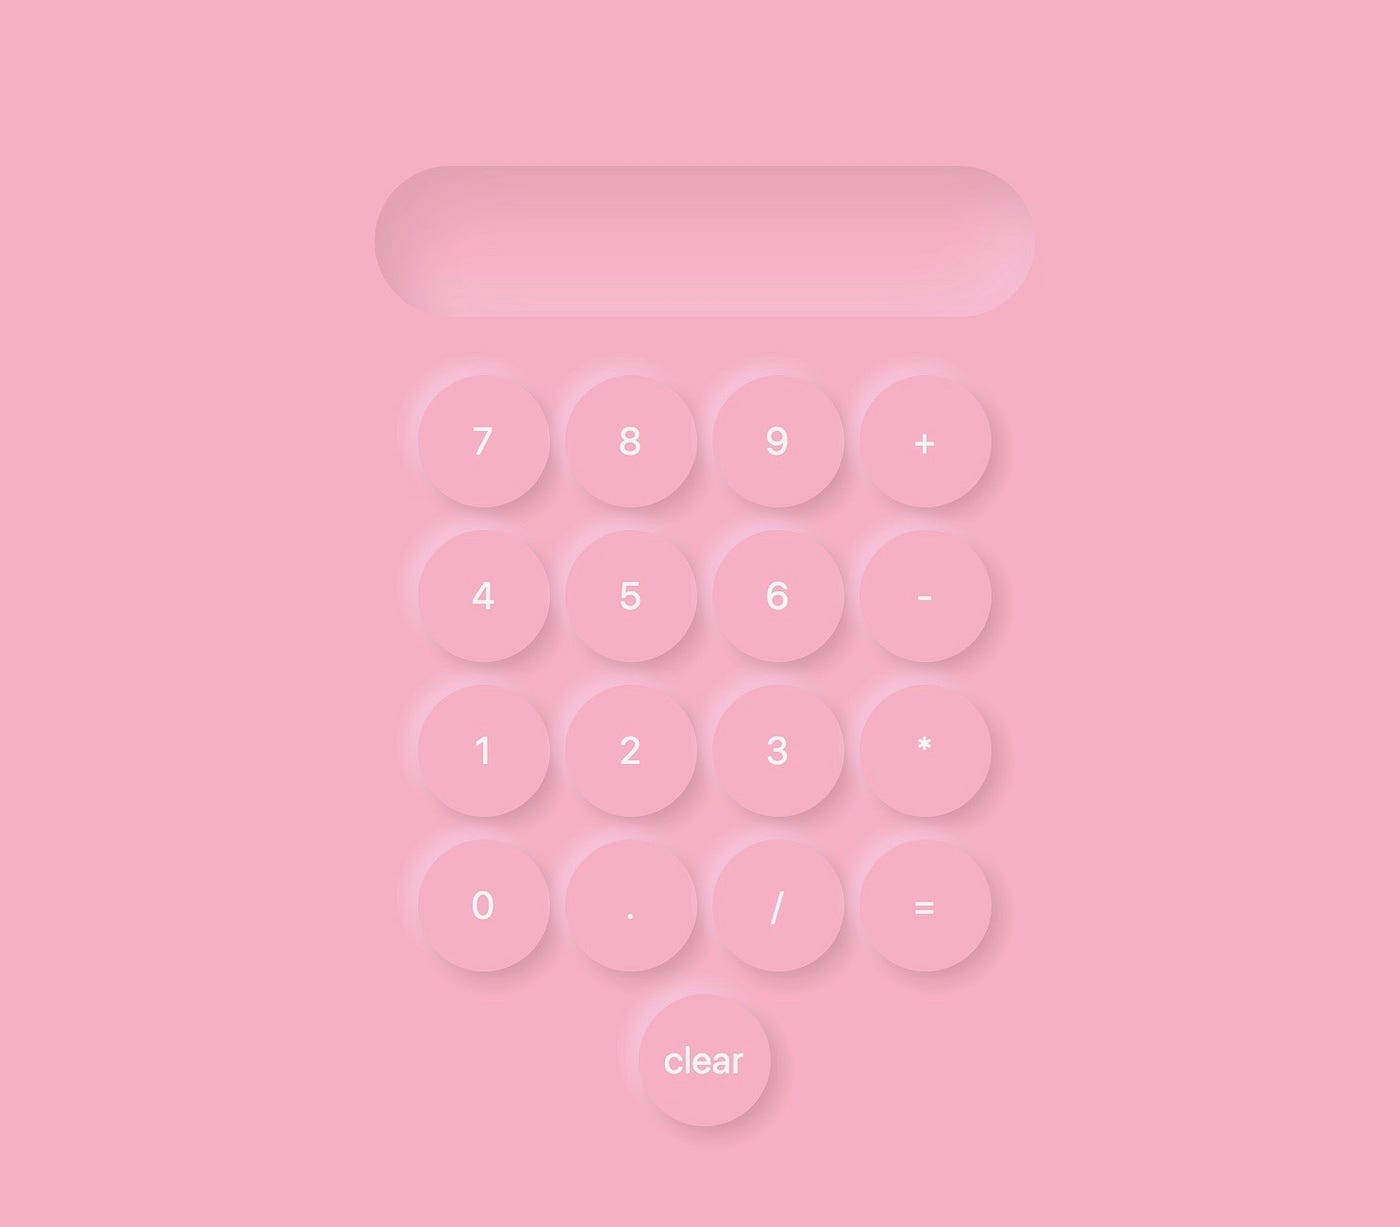 Neumorphic Buttons Using Basic HTML & CSS | by Anjali Chary | UX Planet